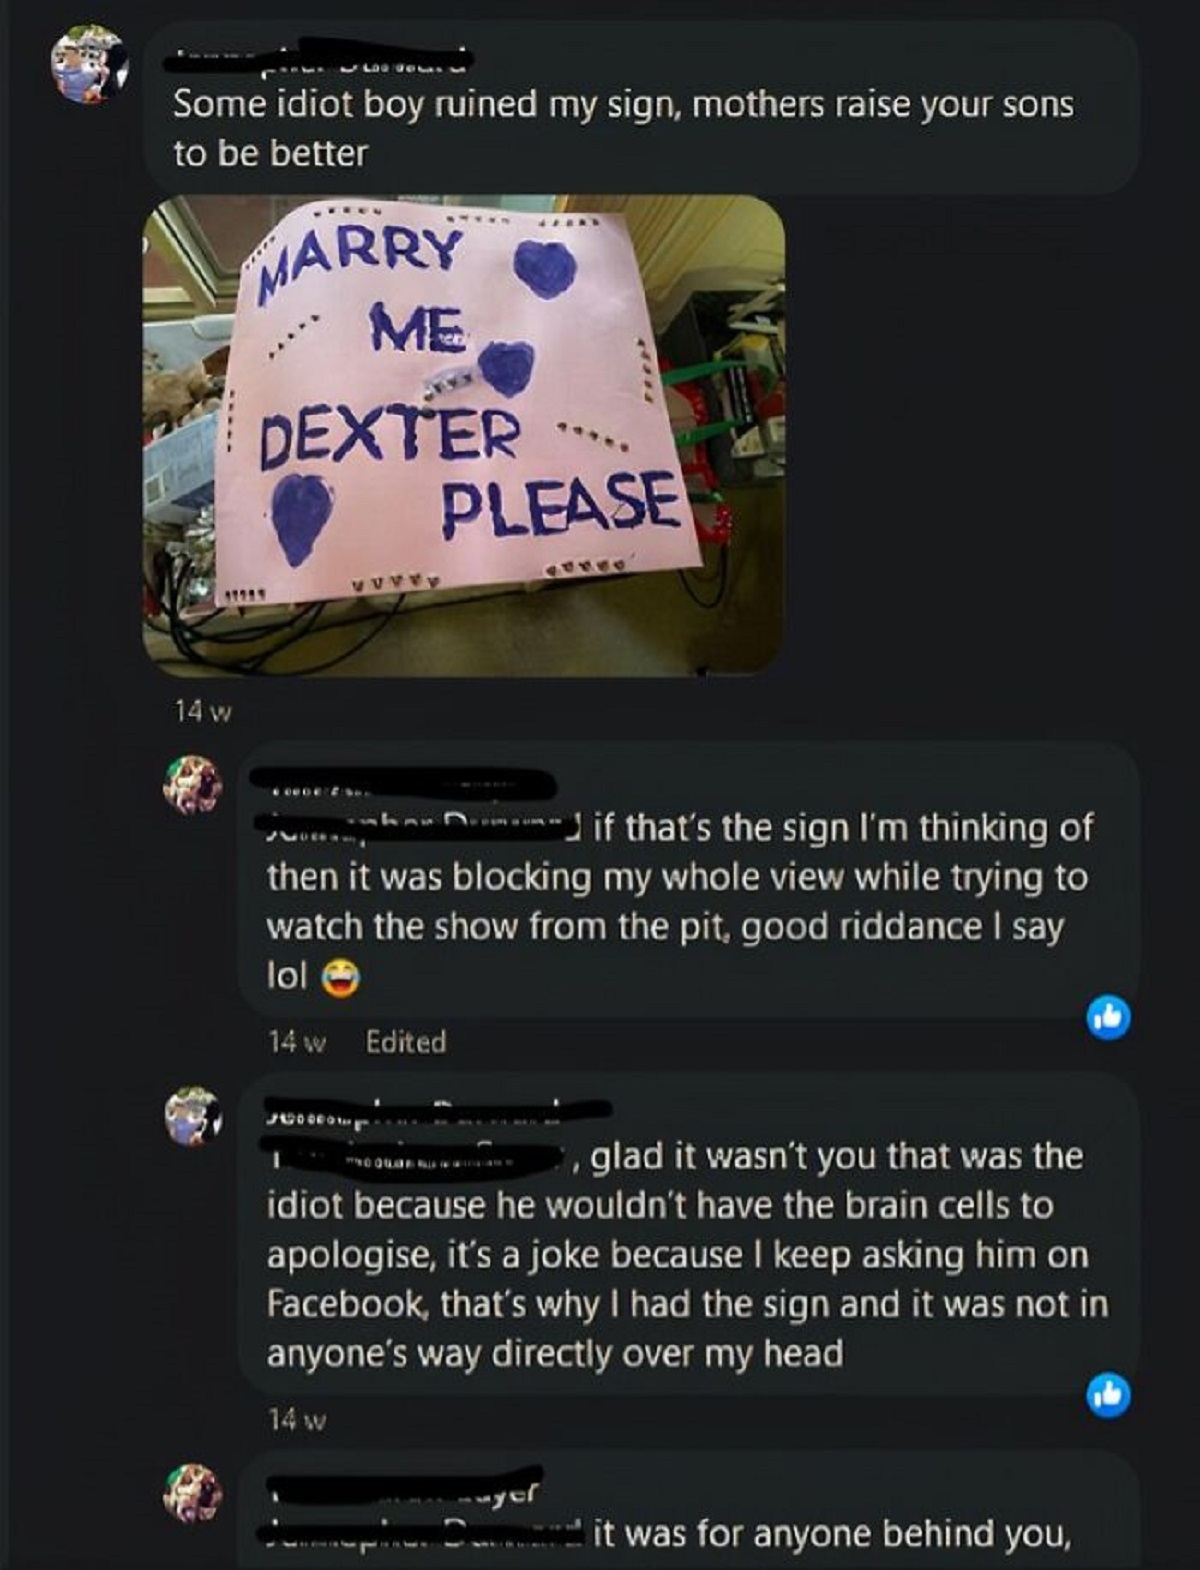 screenshot - Some idiot boy ruined my sign, mothers raise your sons to be better Marry Me Dexter Please 14 w 17255 if that's the sign I'm thinking of then it was blocking my whole view while trying to watch the show from the pit, good riddance I say lol 1